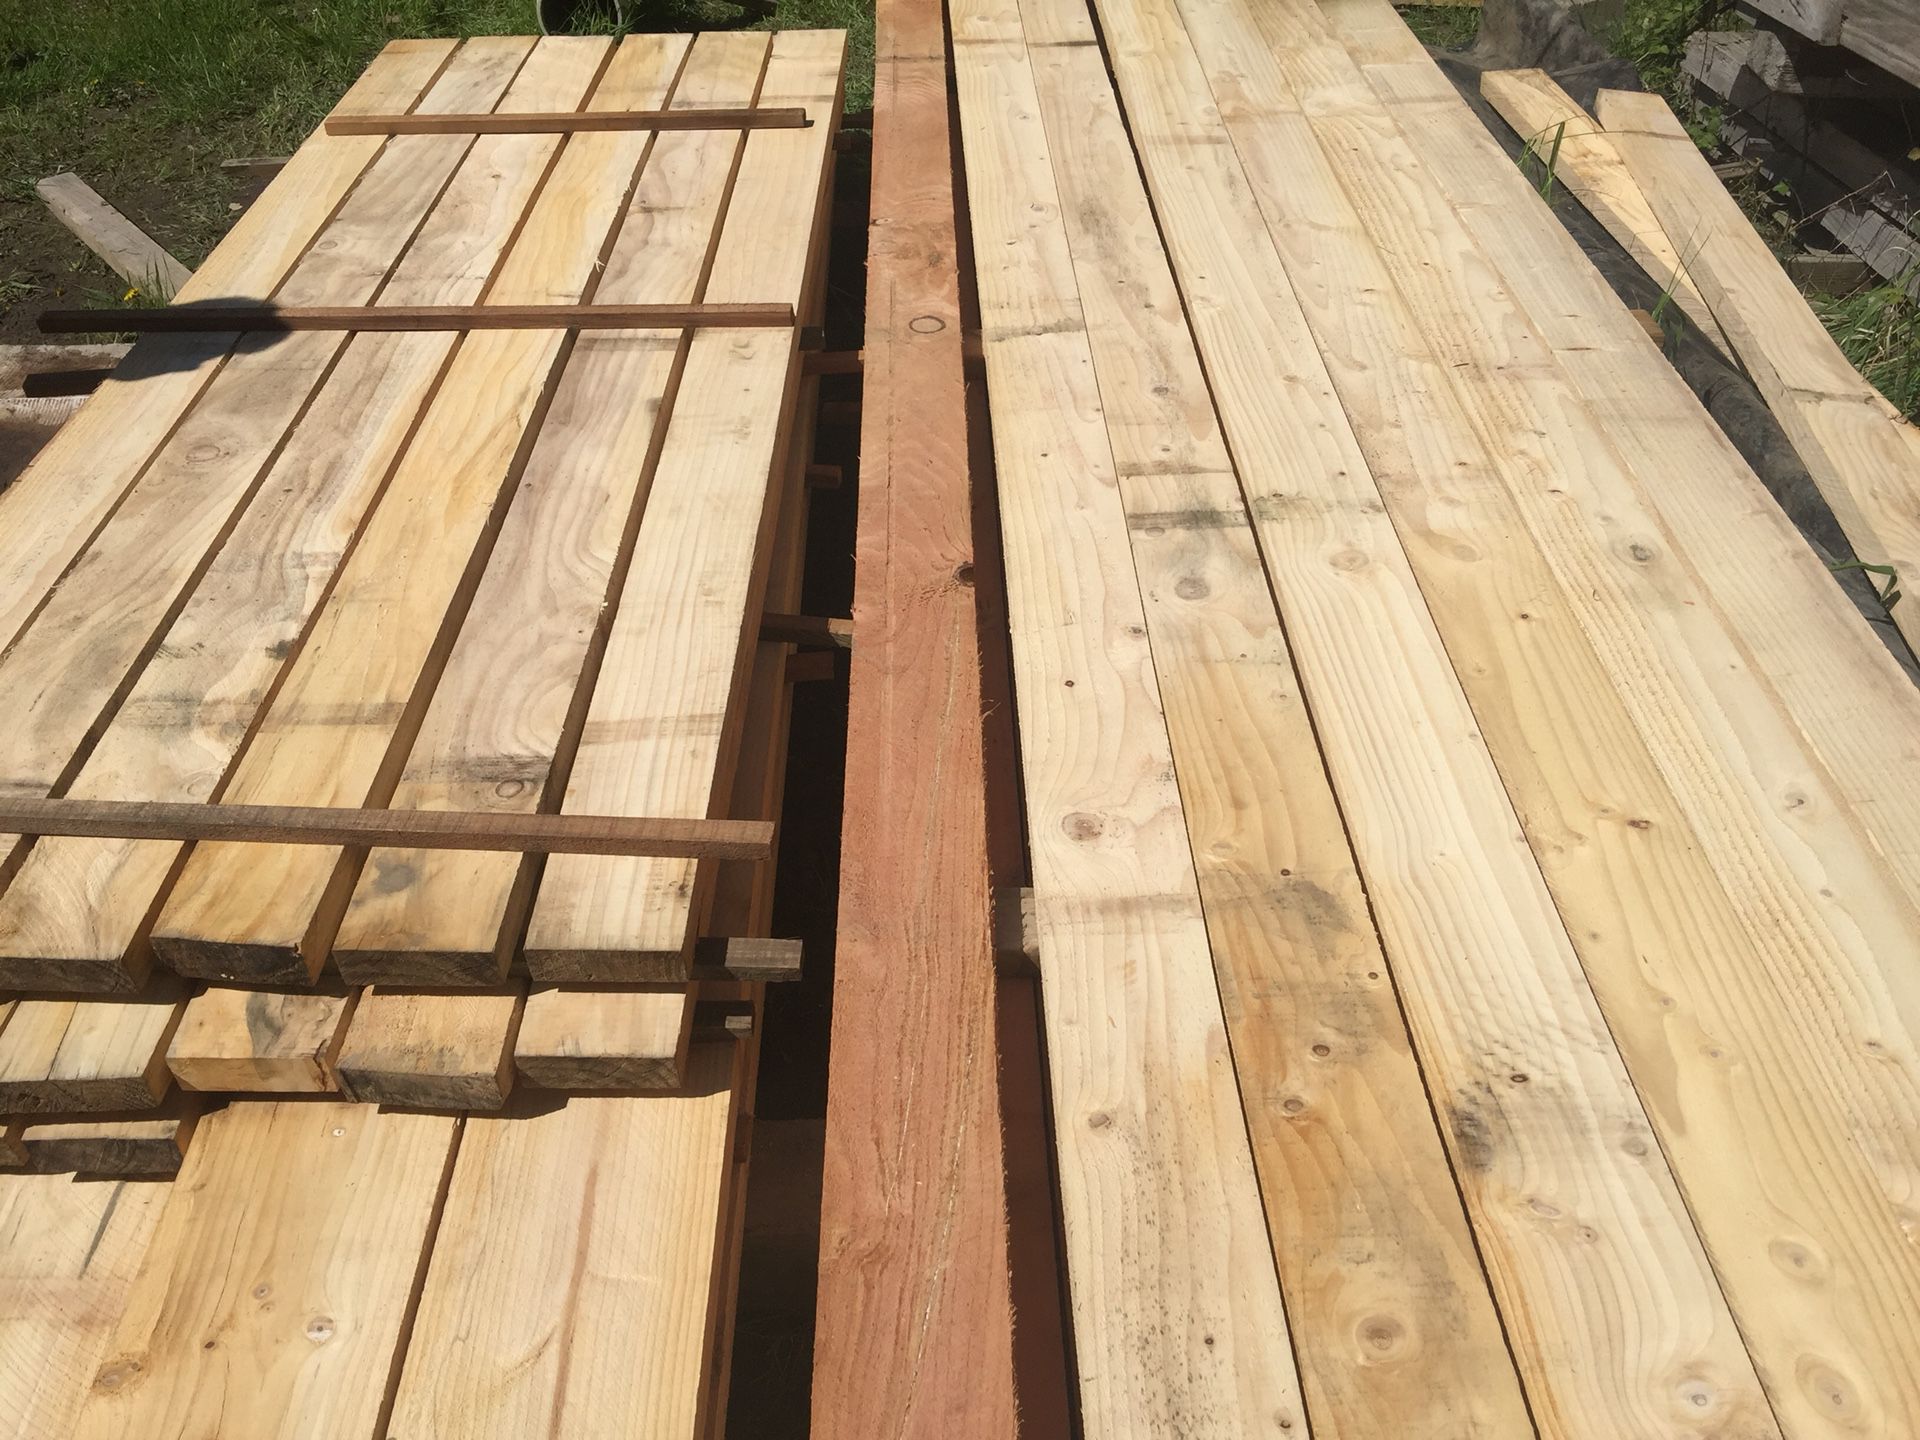 Rough cut fir lumber 100% dry! Would like to sell all Together if possible